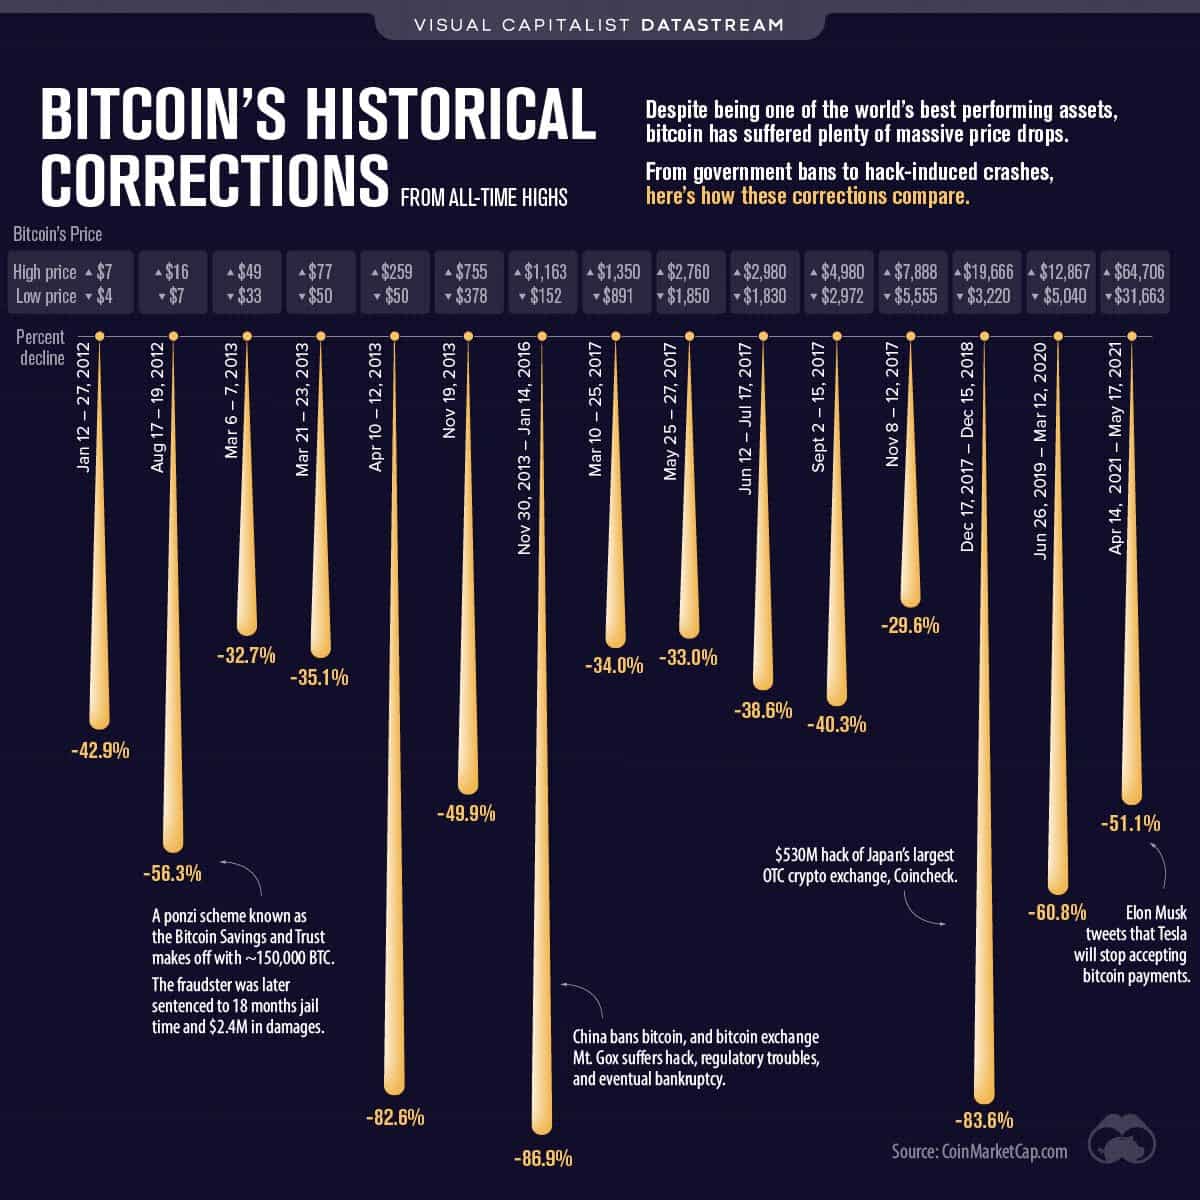 How Does the May 19th Bitcoin Correction Compare to History?